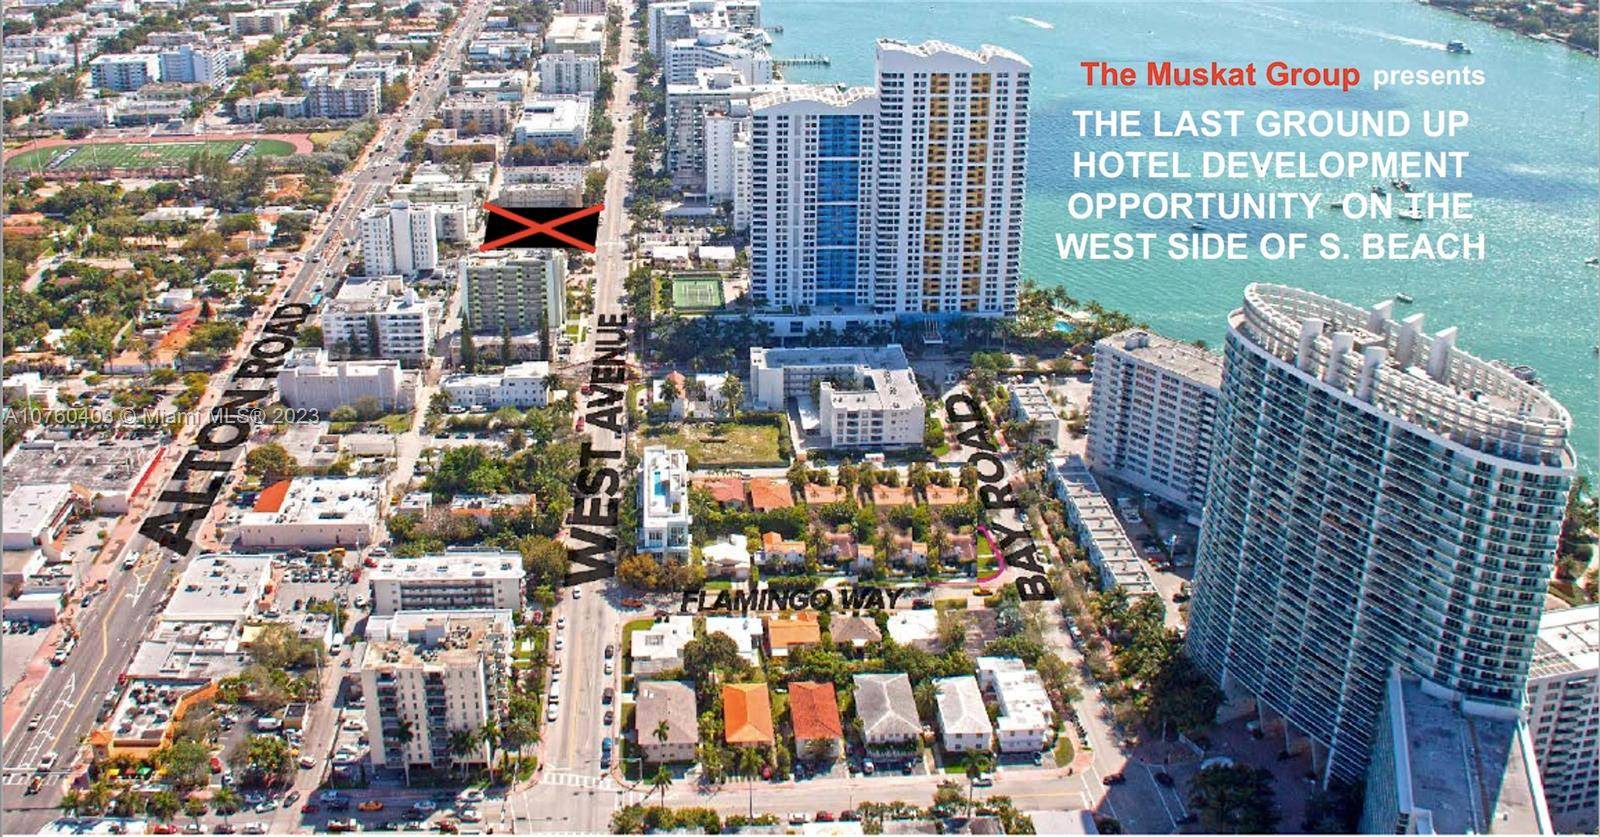 BUILD 34, 500 SQ. FT. OR POSSIBLY MORE WITH FLORIDA LIVE LOCAL ACT OF A CONDO, HOTEL, CONDO HOTEL, OR HOSTEL.